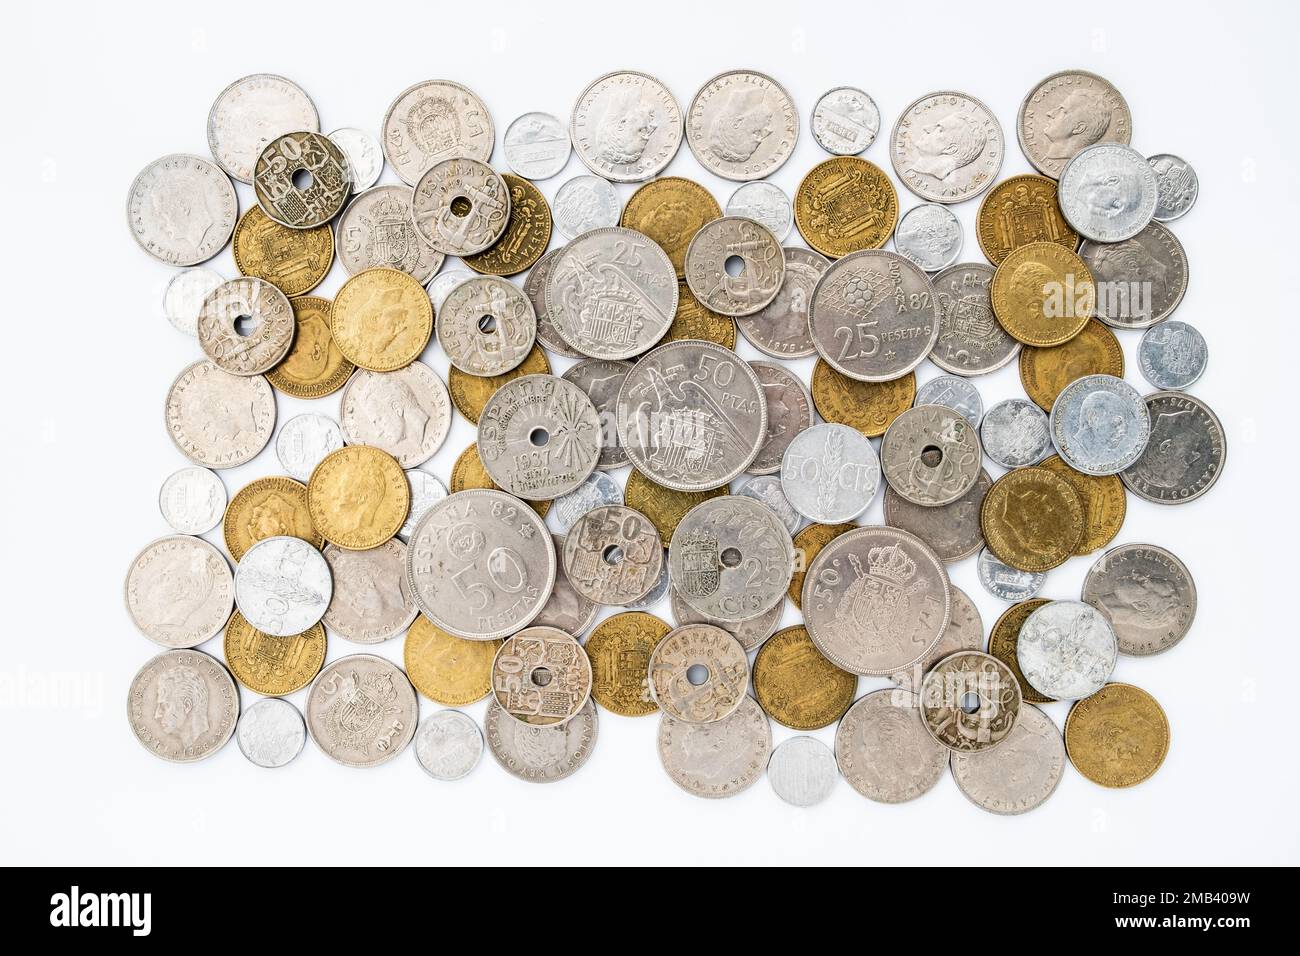 Spanish money from the last century. Old coins of Spain Stock Photo